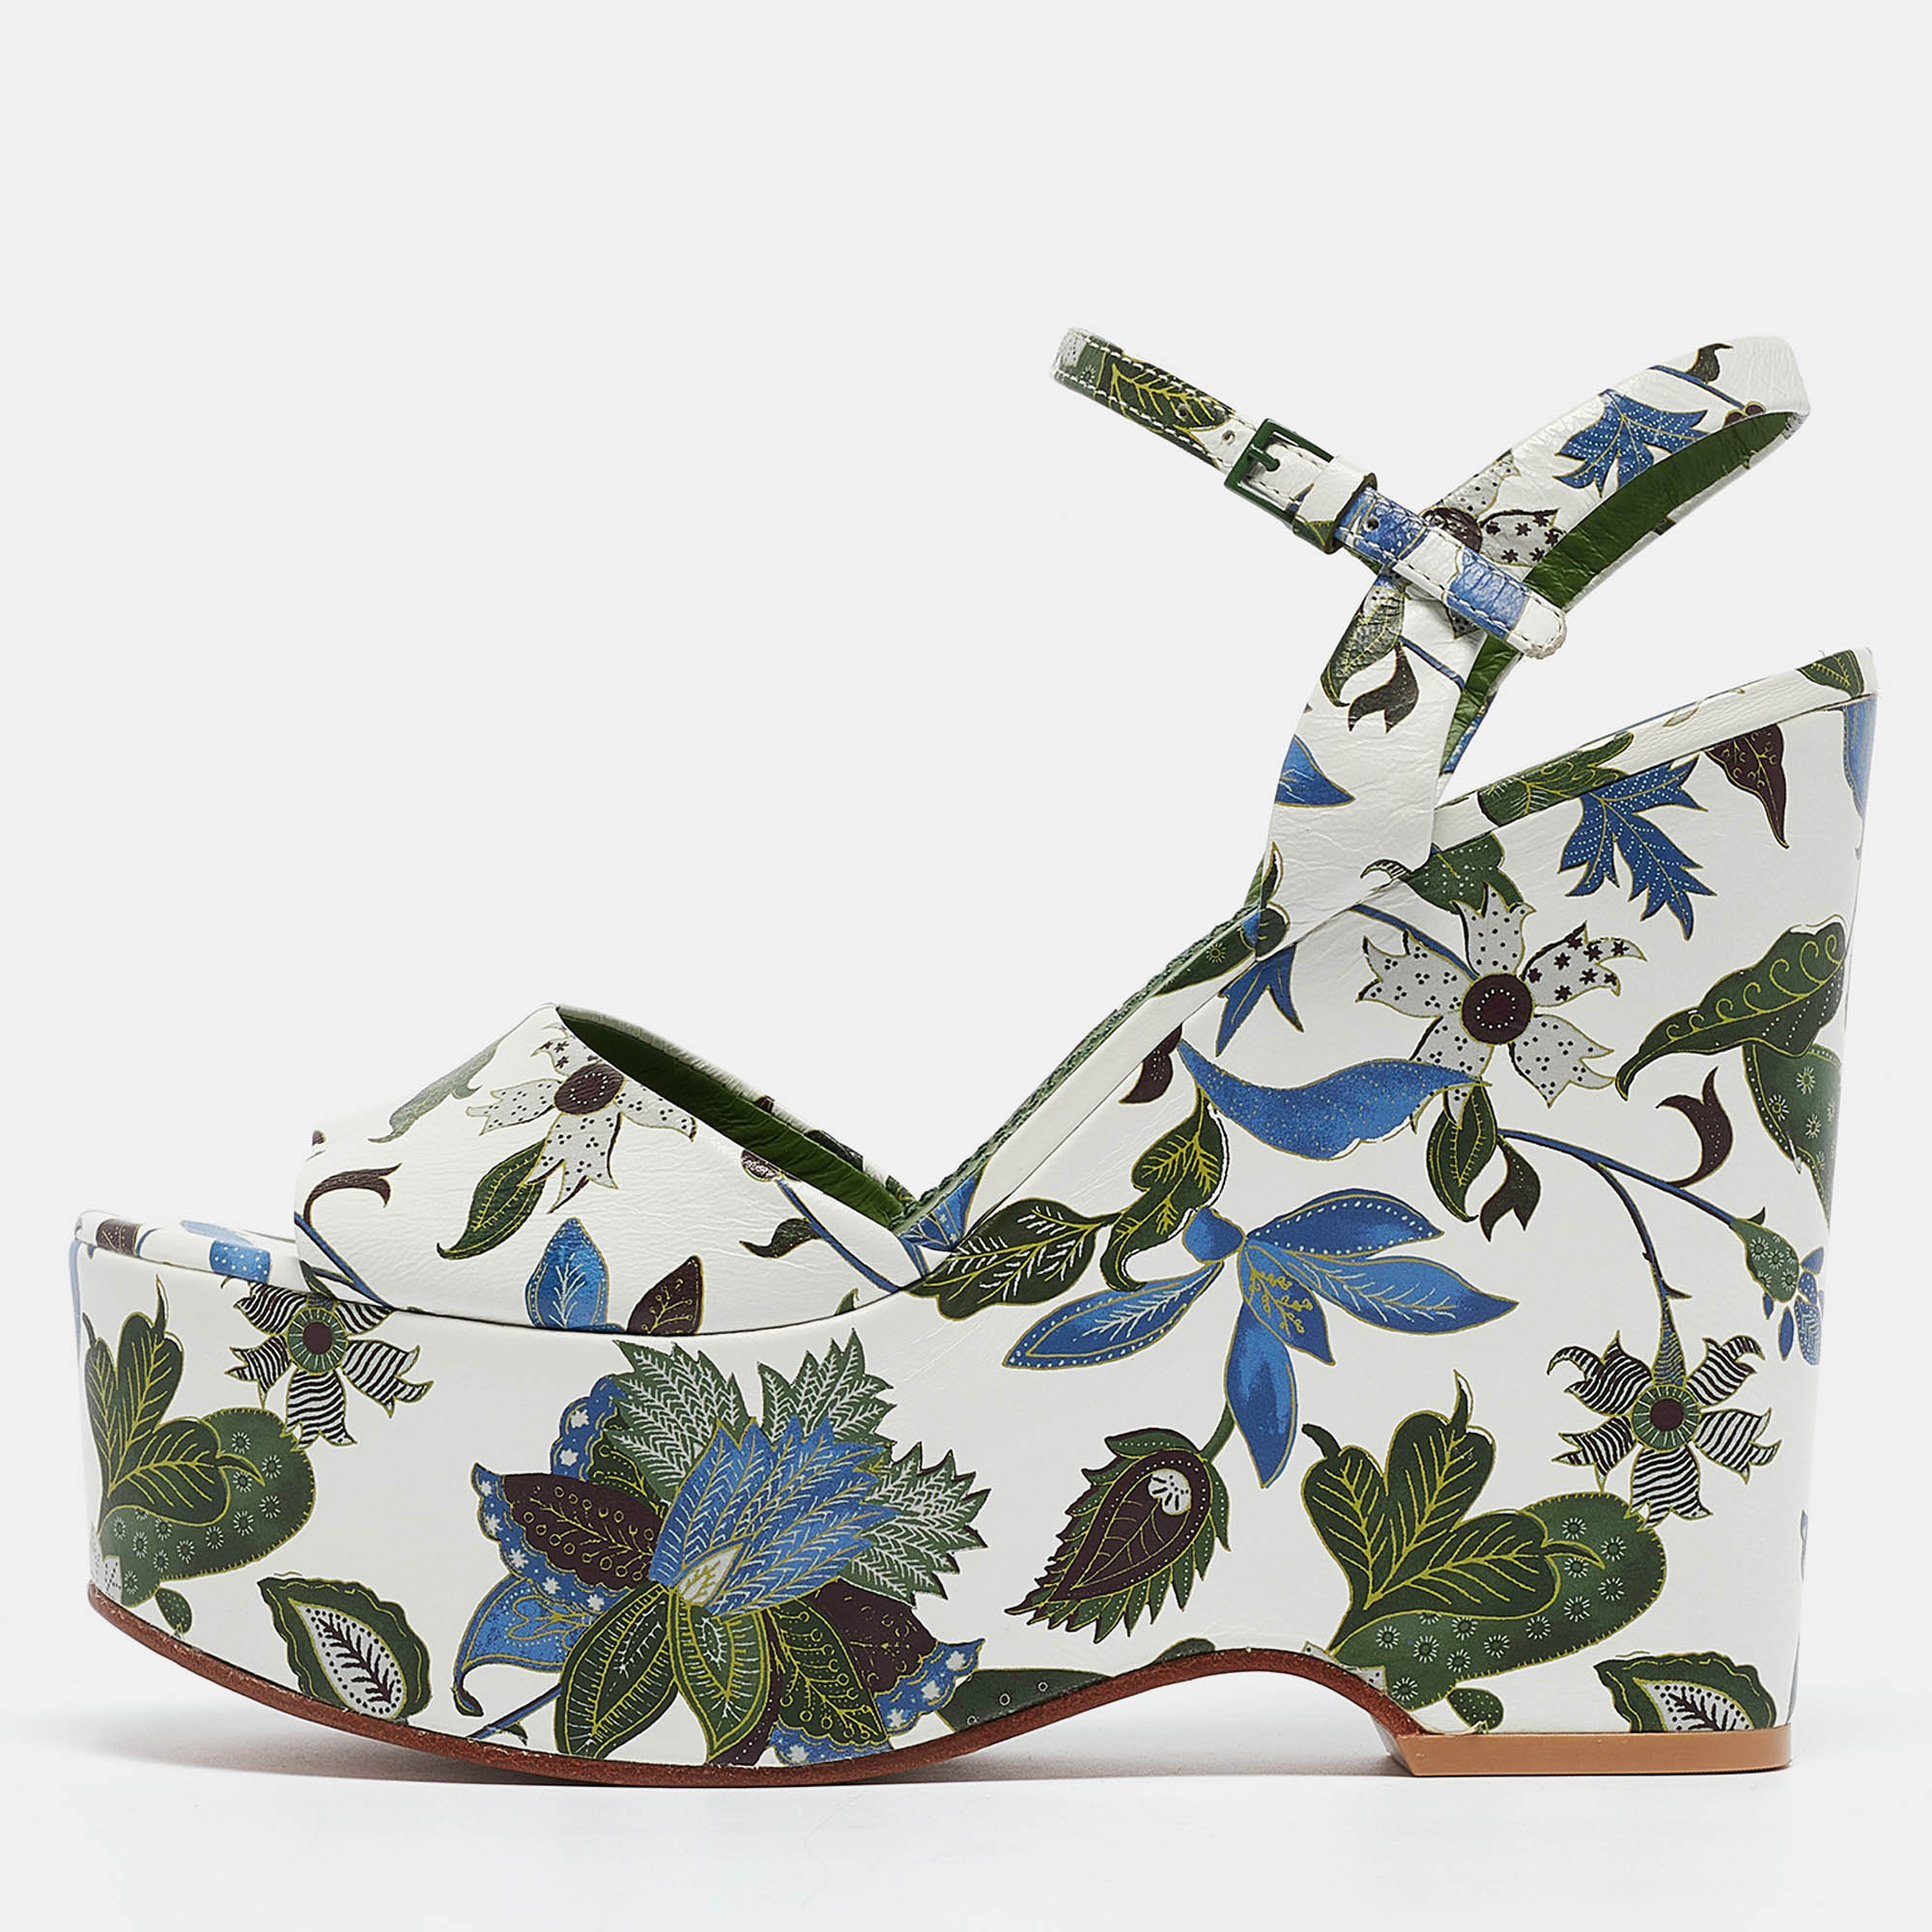 

Tory Burch Tricolor Floral Print Leather Platform Wedge Ankle Strap Sandals Size 39, White